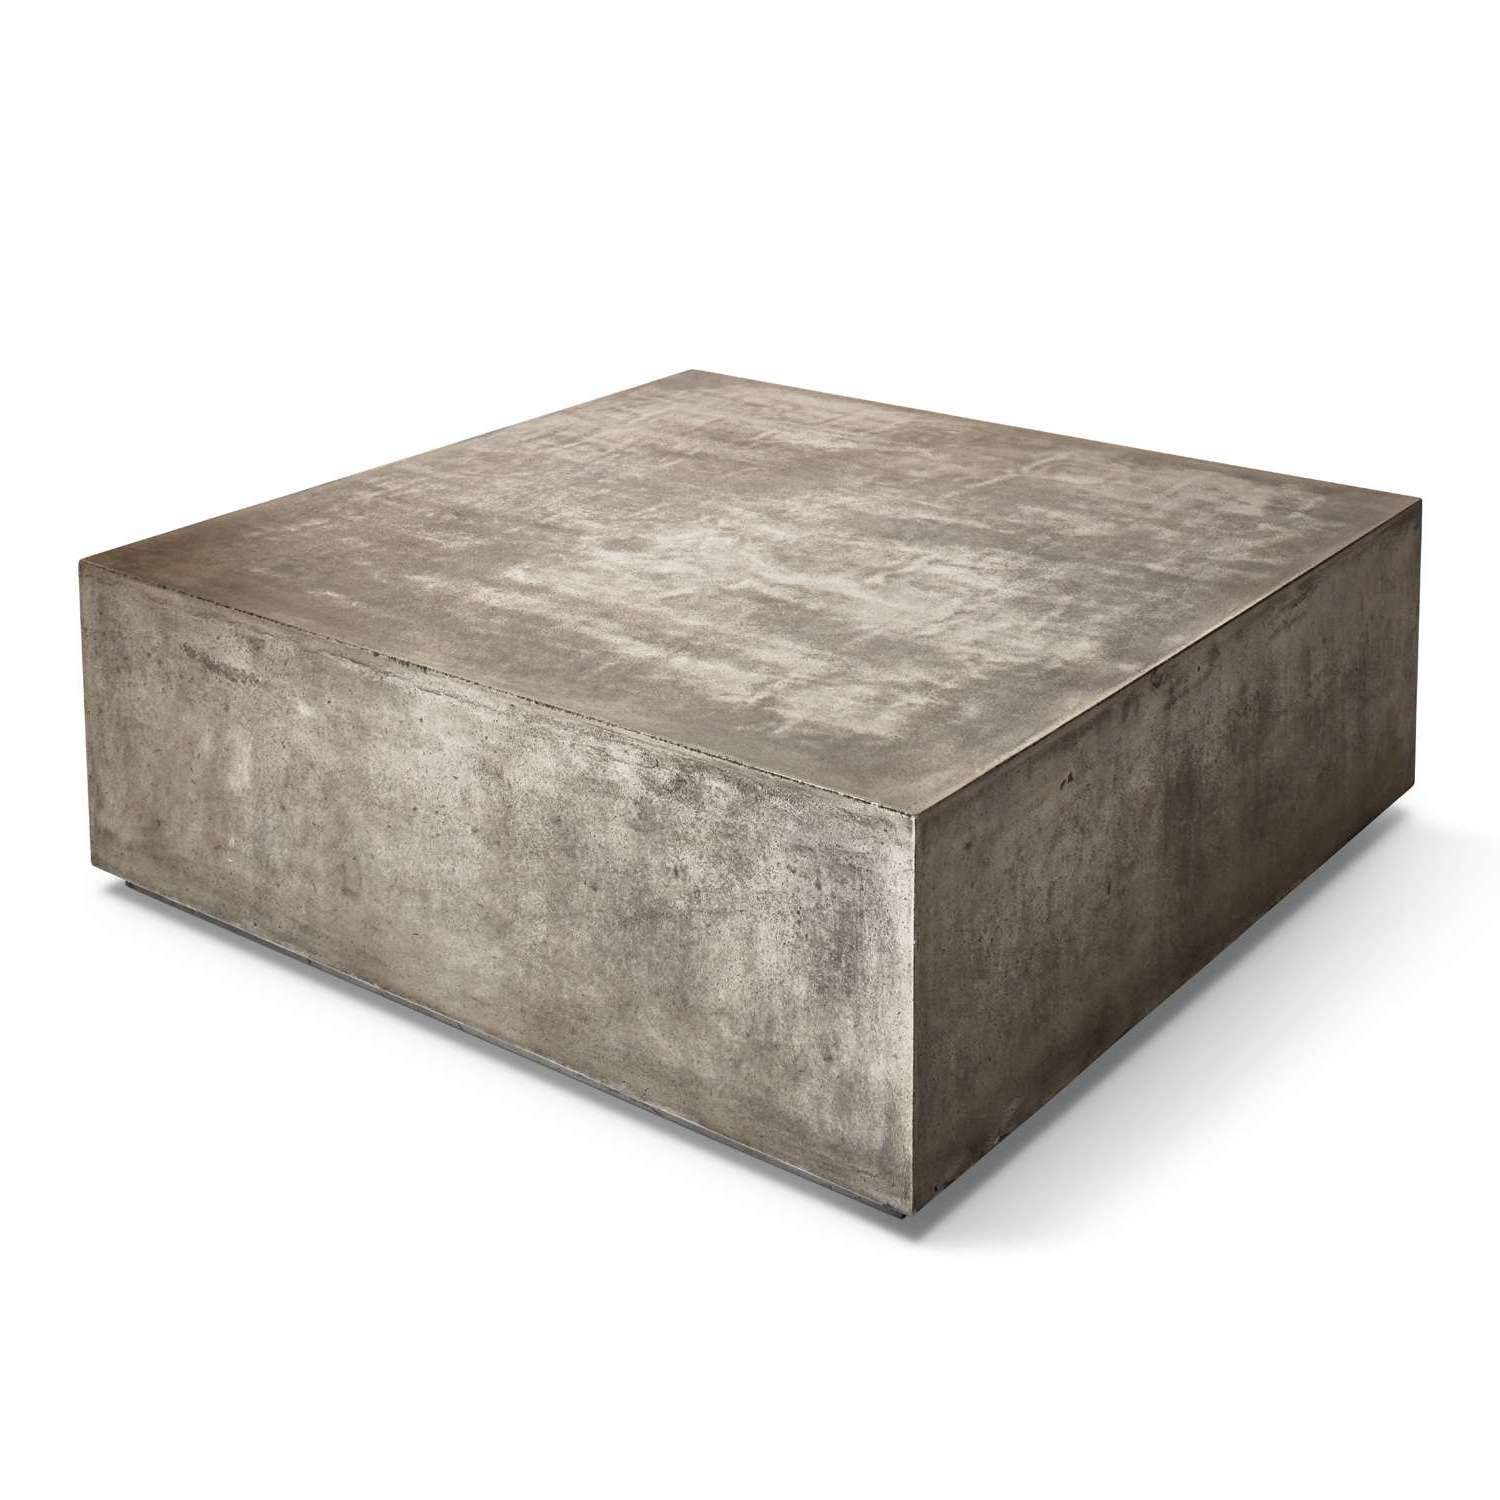 Newest Modern Coffee Tables With Storage Intended For Modern Coffee Tables & Low Tables (View 4 of 20)